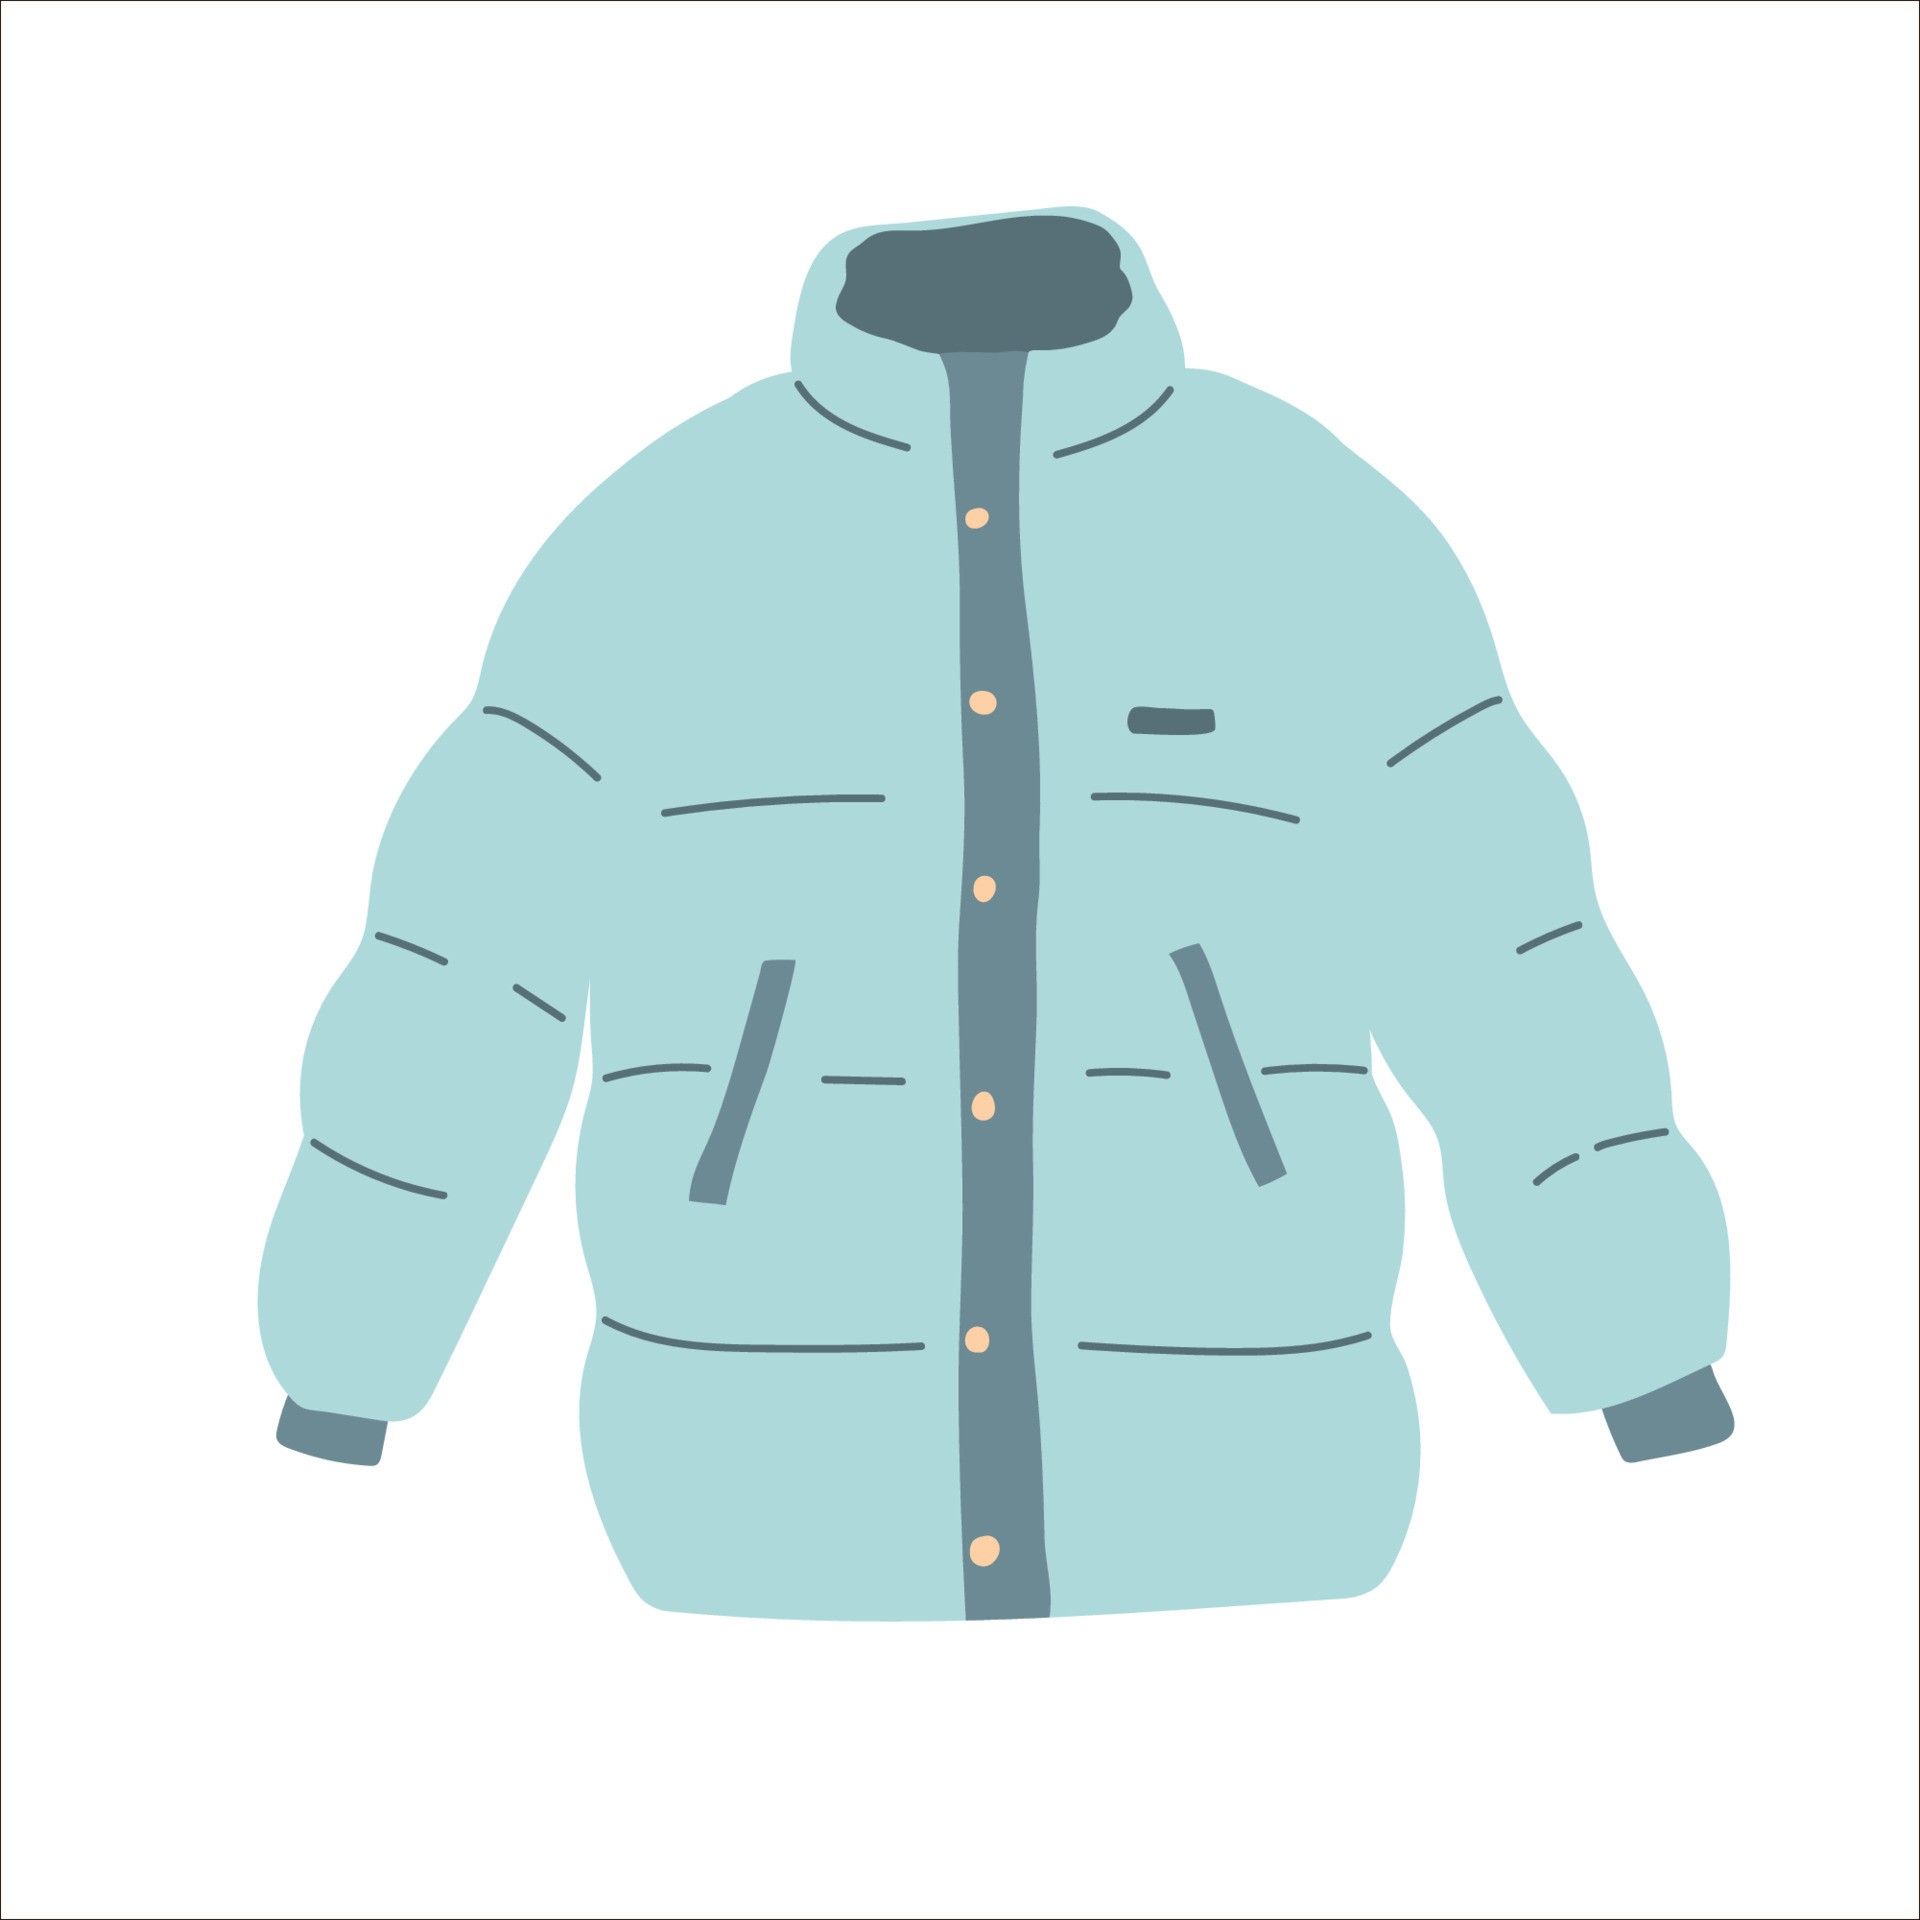 https://static.vecteezy.com/system/resources/previews/004/866/649/original/blue-winter-zipped-down-jacket-isolated-on-the-white-background-padded-jacket-with-buttons-blue-hand-drawing-flat-vector.jpg